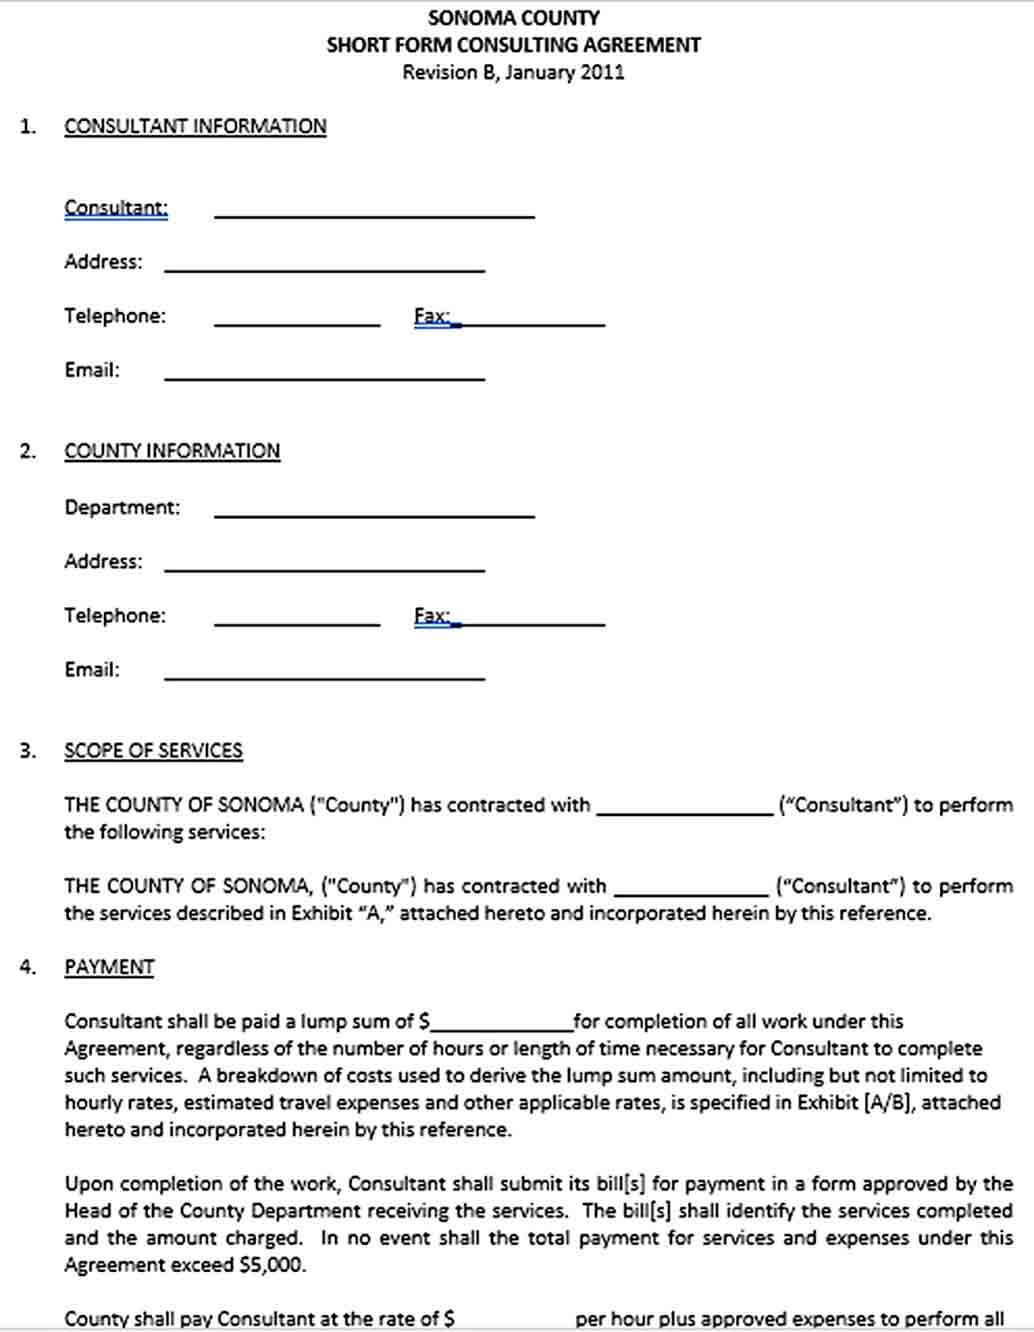 Sample Sample Short Form Consulting Agreement